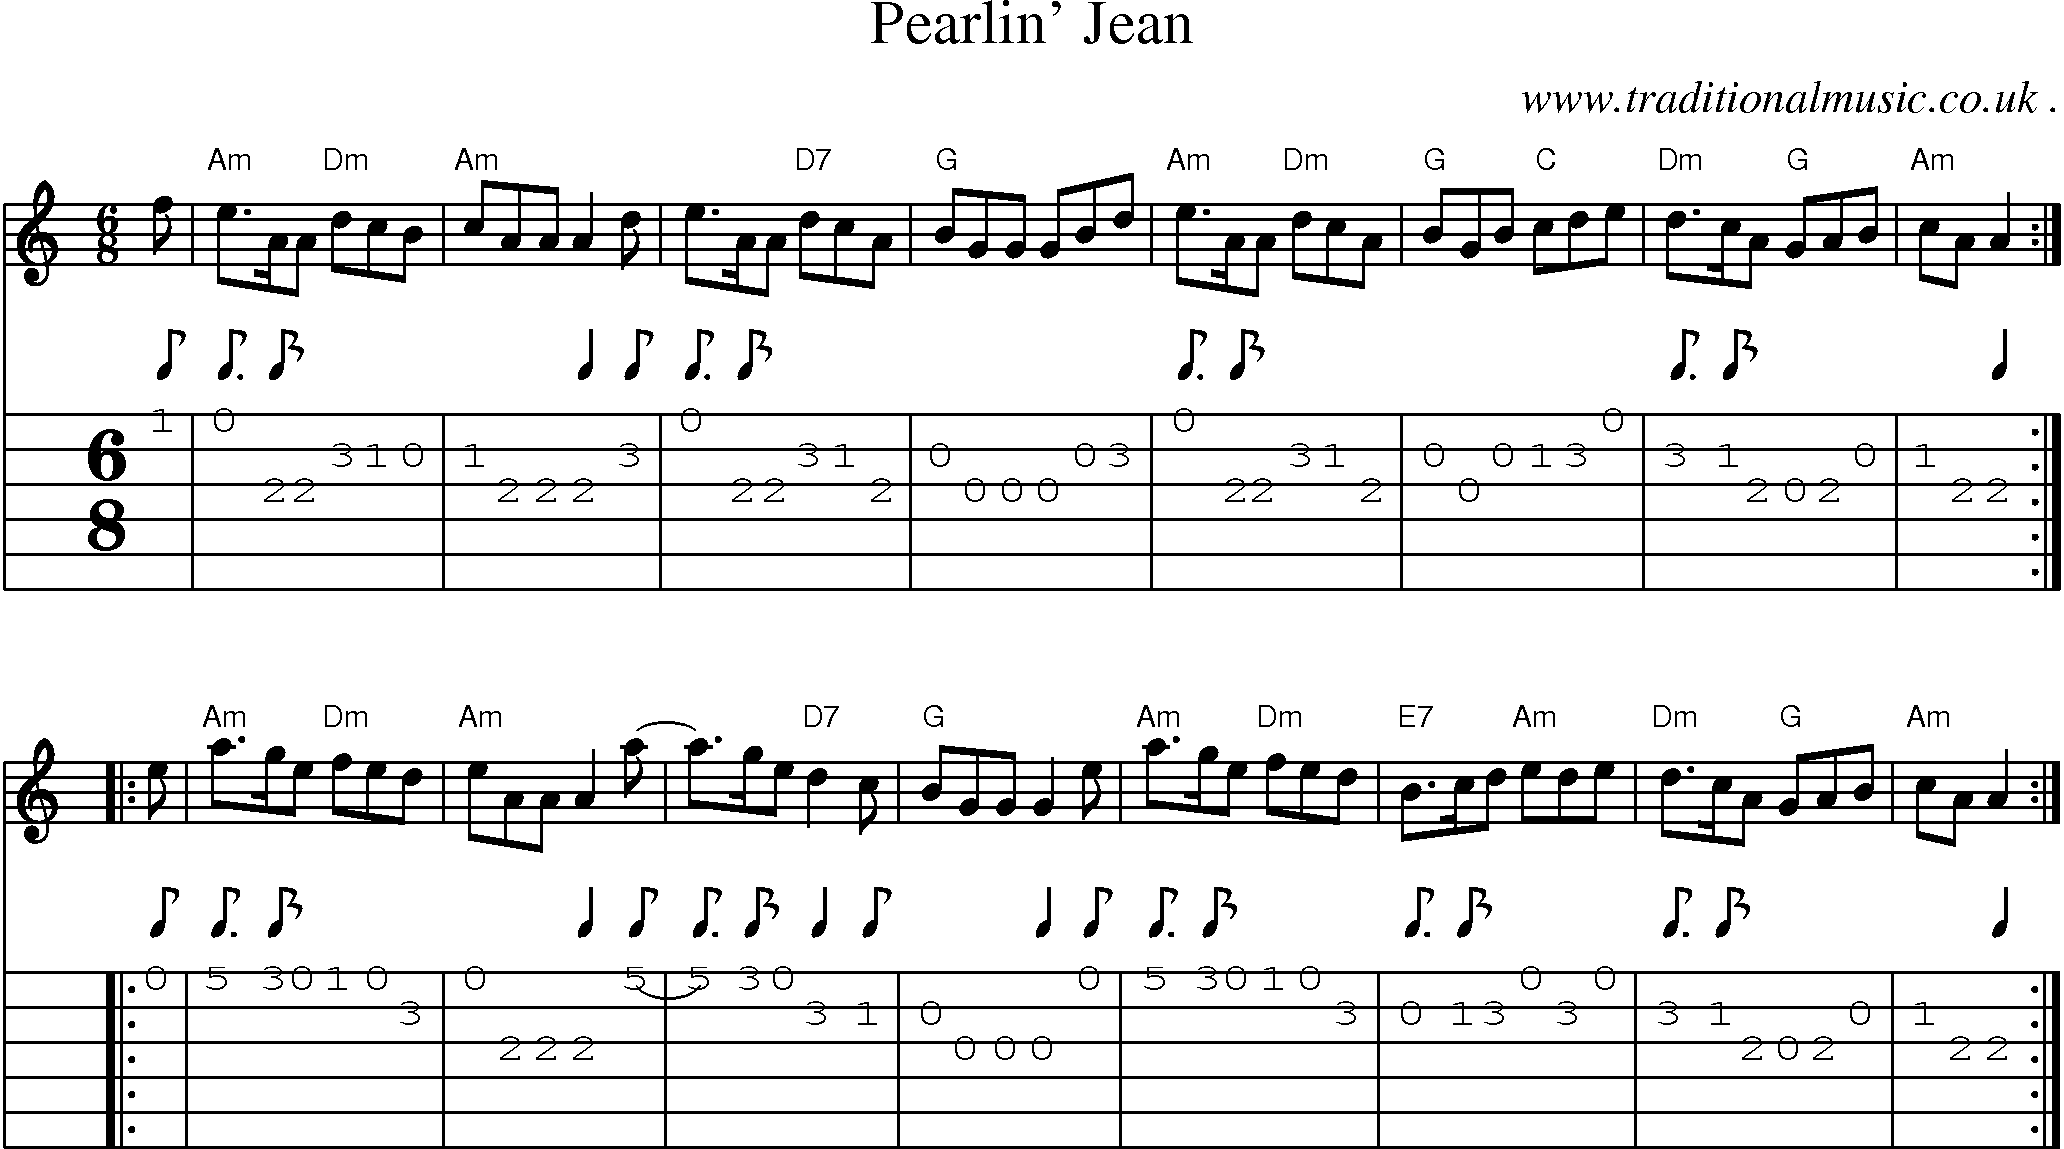 Sheet-music  score, Chords and Guitar Tabs for Pearlin Jean